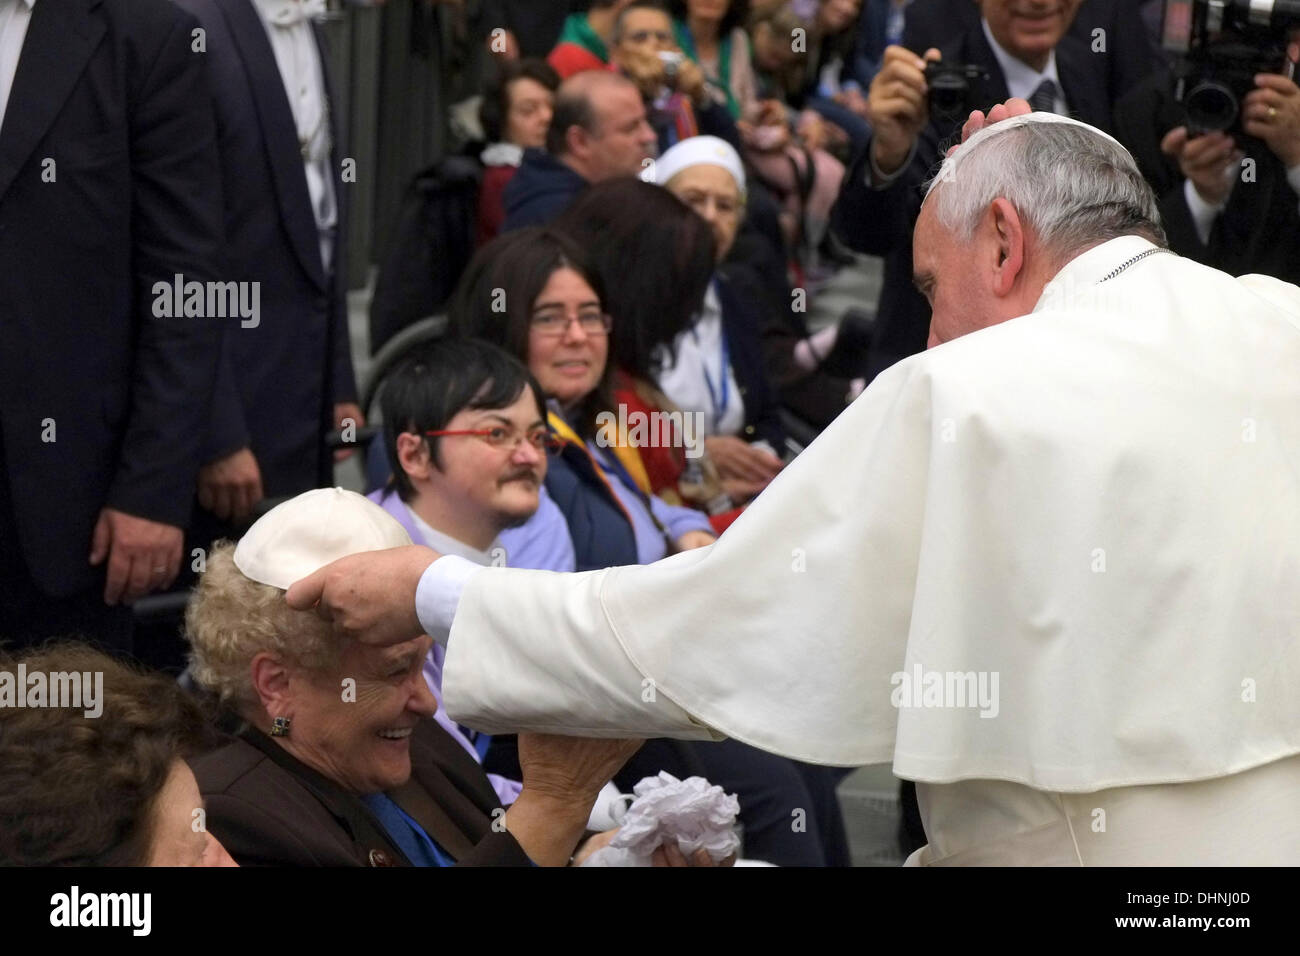 Rome, Italy. 9th November 2013. Pope Francis jokes with a lady who gave her a skullcap during the meeting UNITALSI( Italian National Union for Transporting the Sick to Lourdes and International Shrines )  9 November  2013 © Realy Easy Star/Alamy Live News Stock Photo